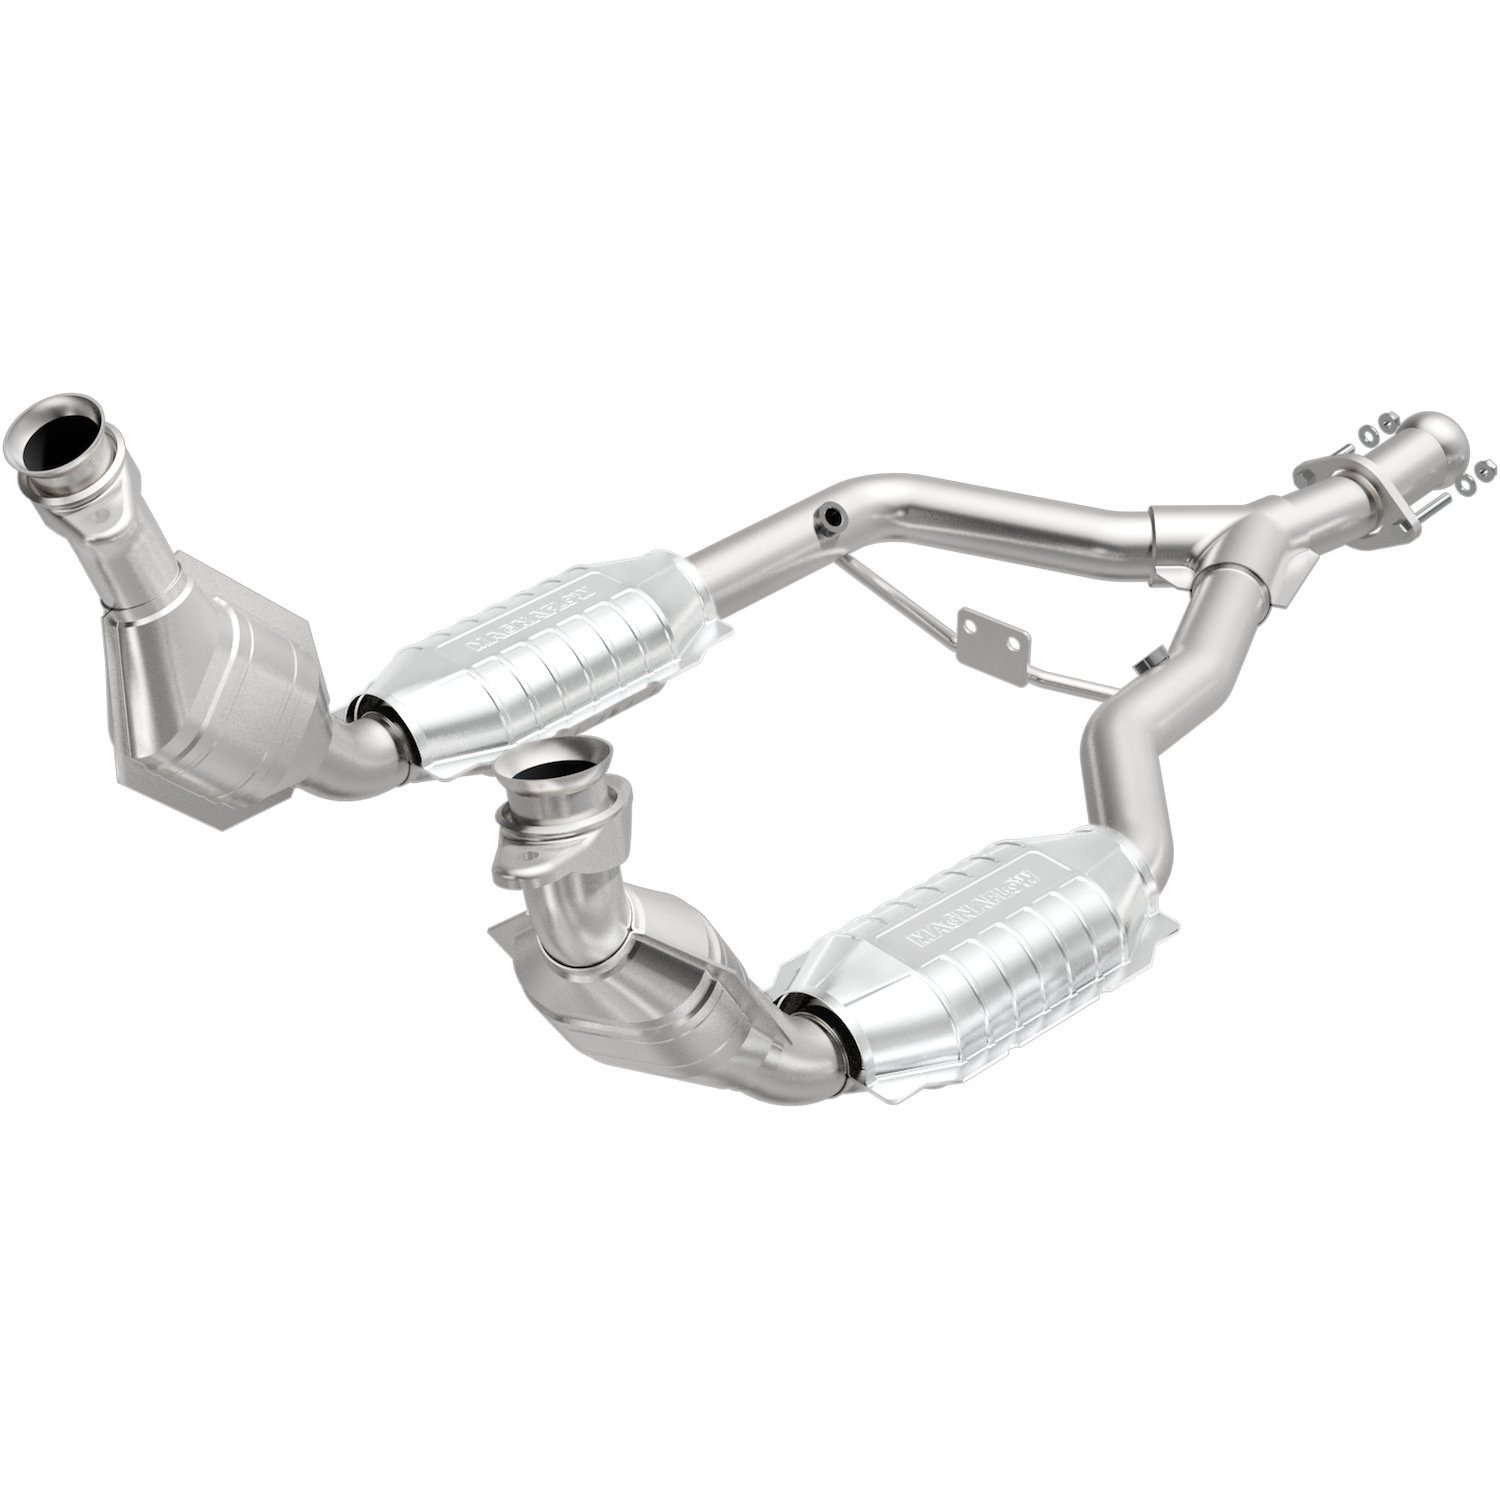 1996-1998 Ford Mustang HM Grade Federal / EPA Compliant Direct-Fit Catalytic Converter